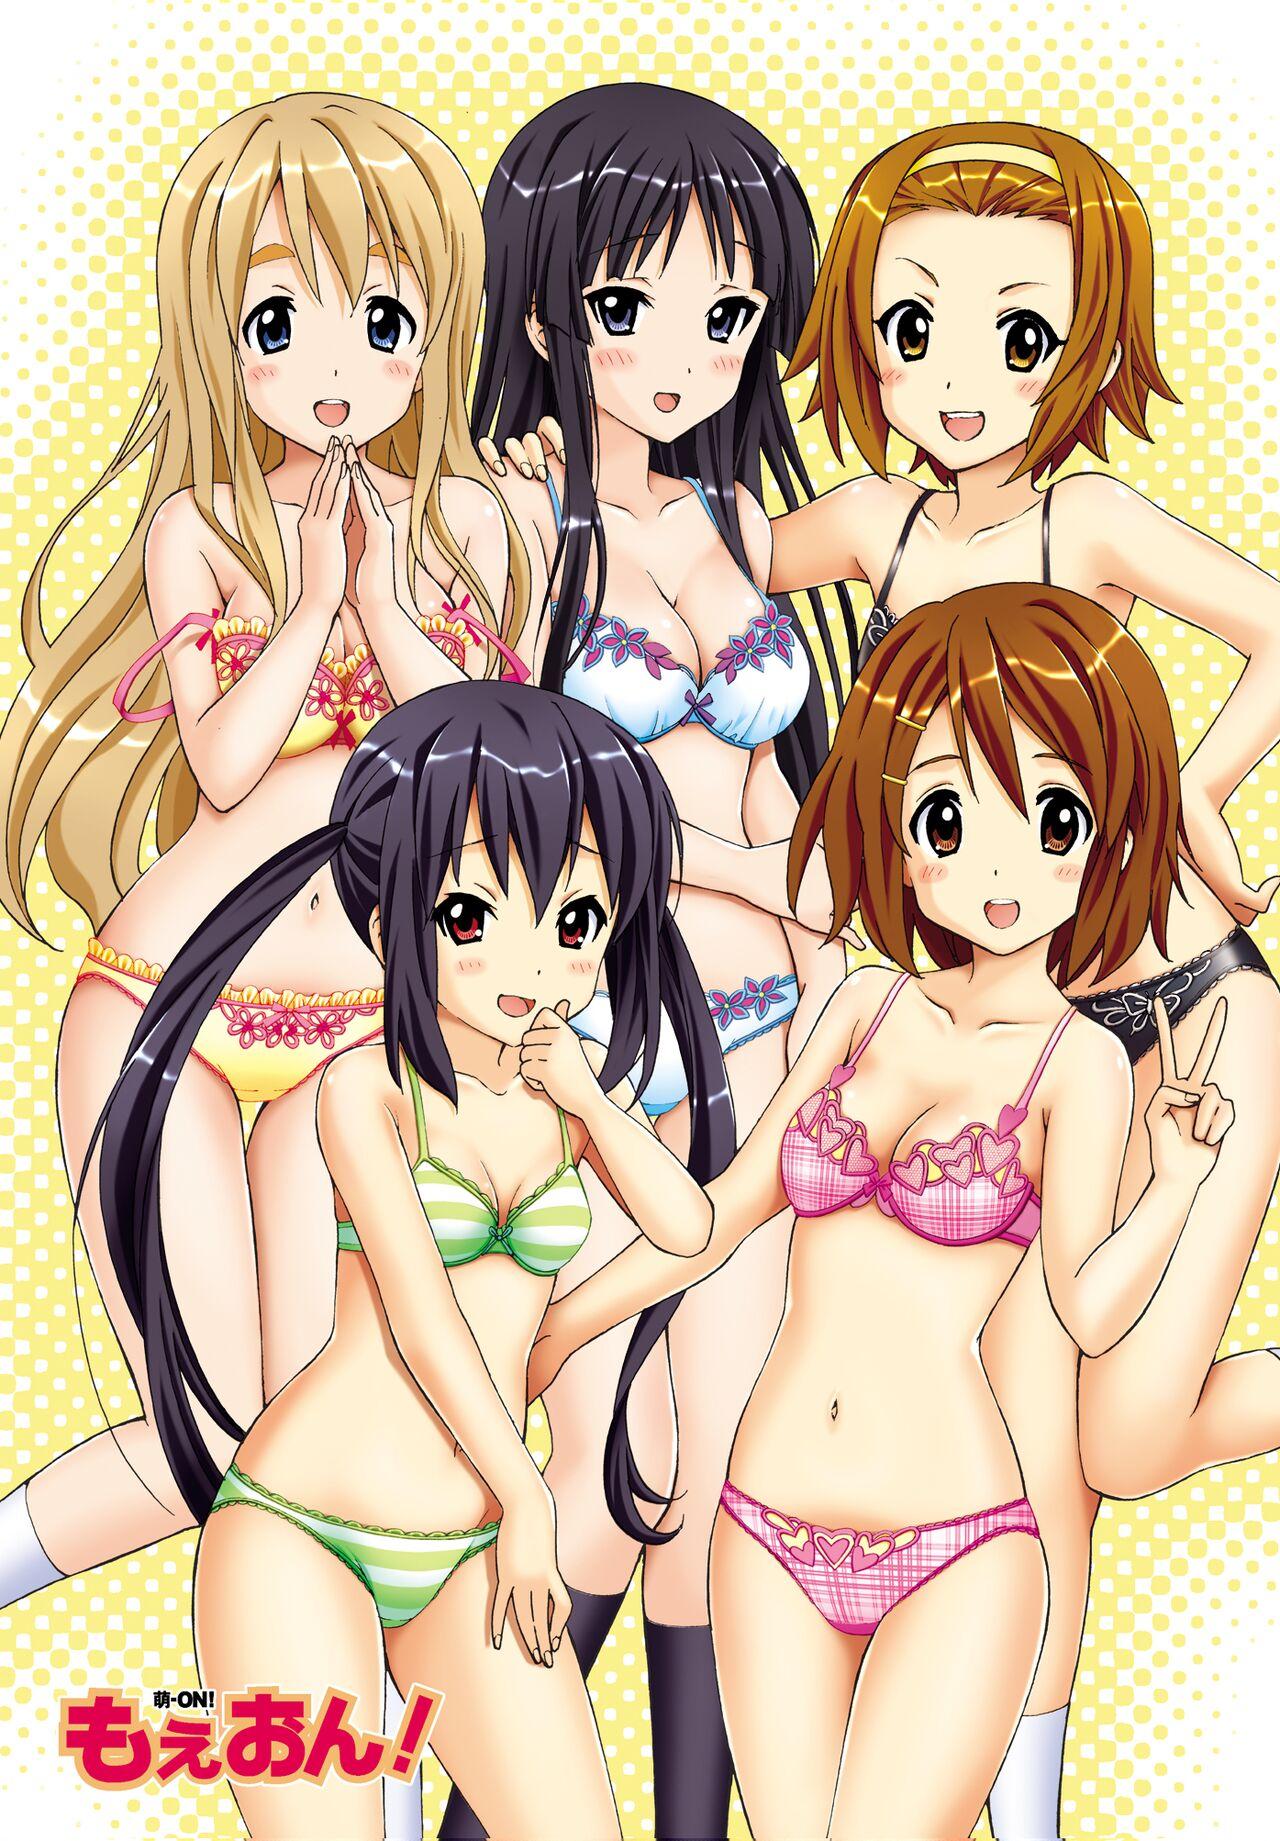 Indonesian Moe-on - K-on Sexteen - Page 3